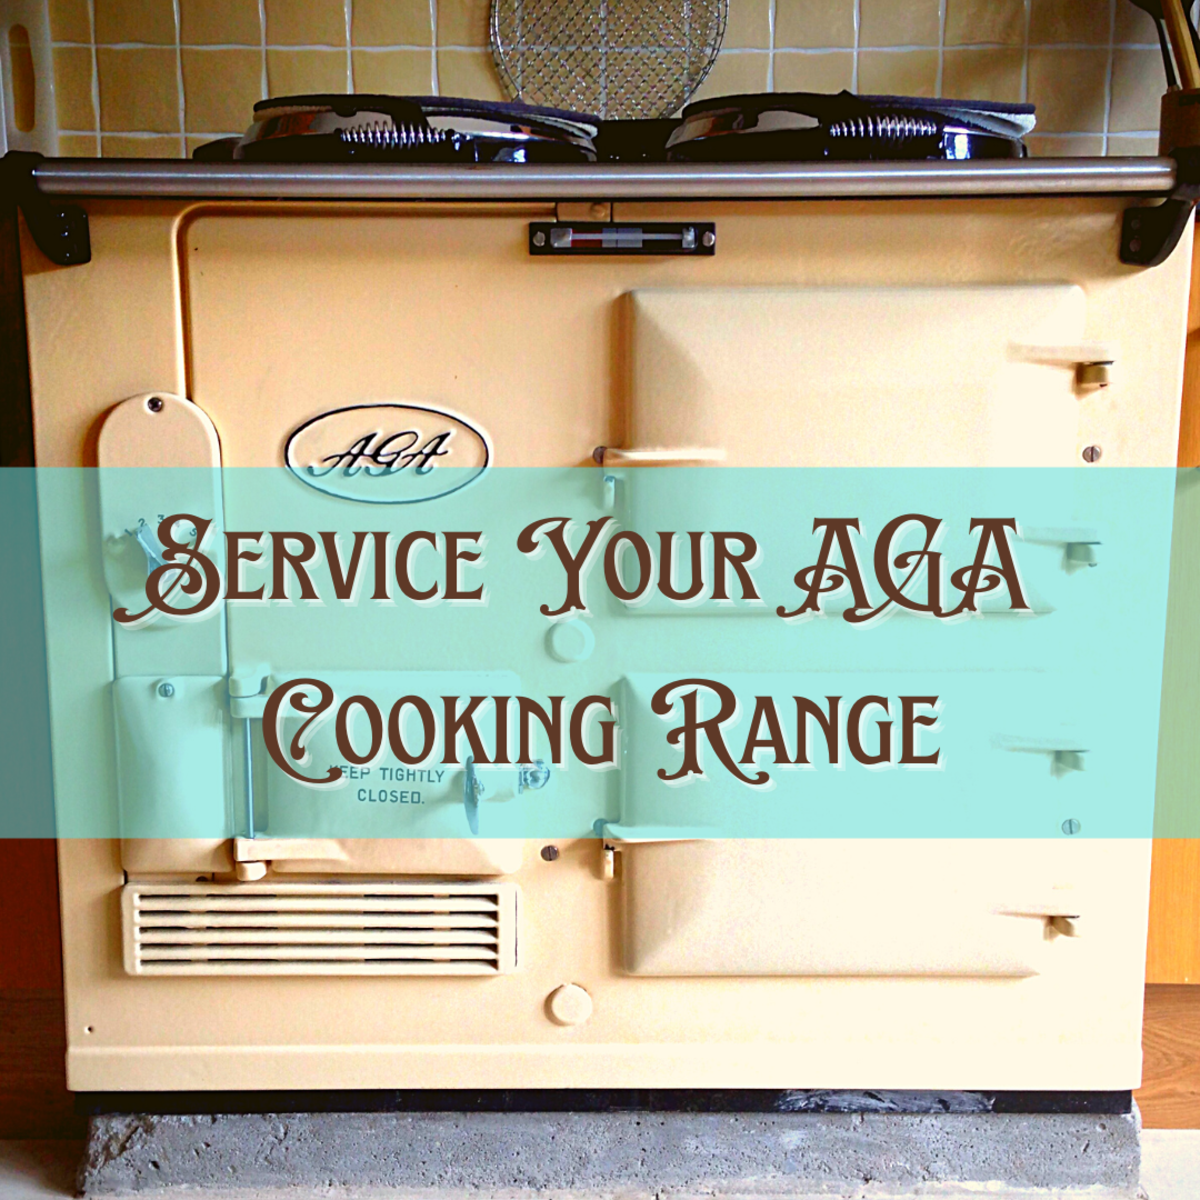 You can clean your own AGA!